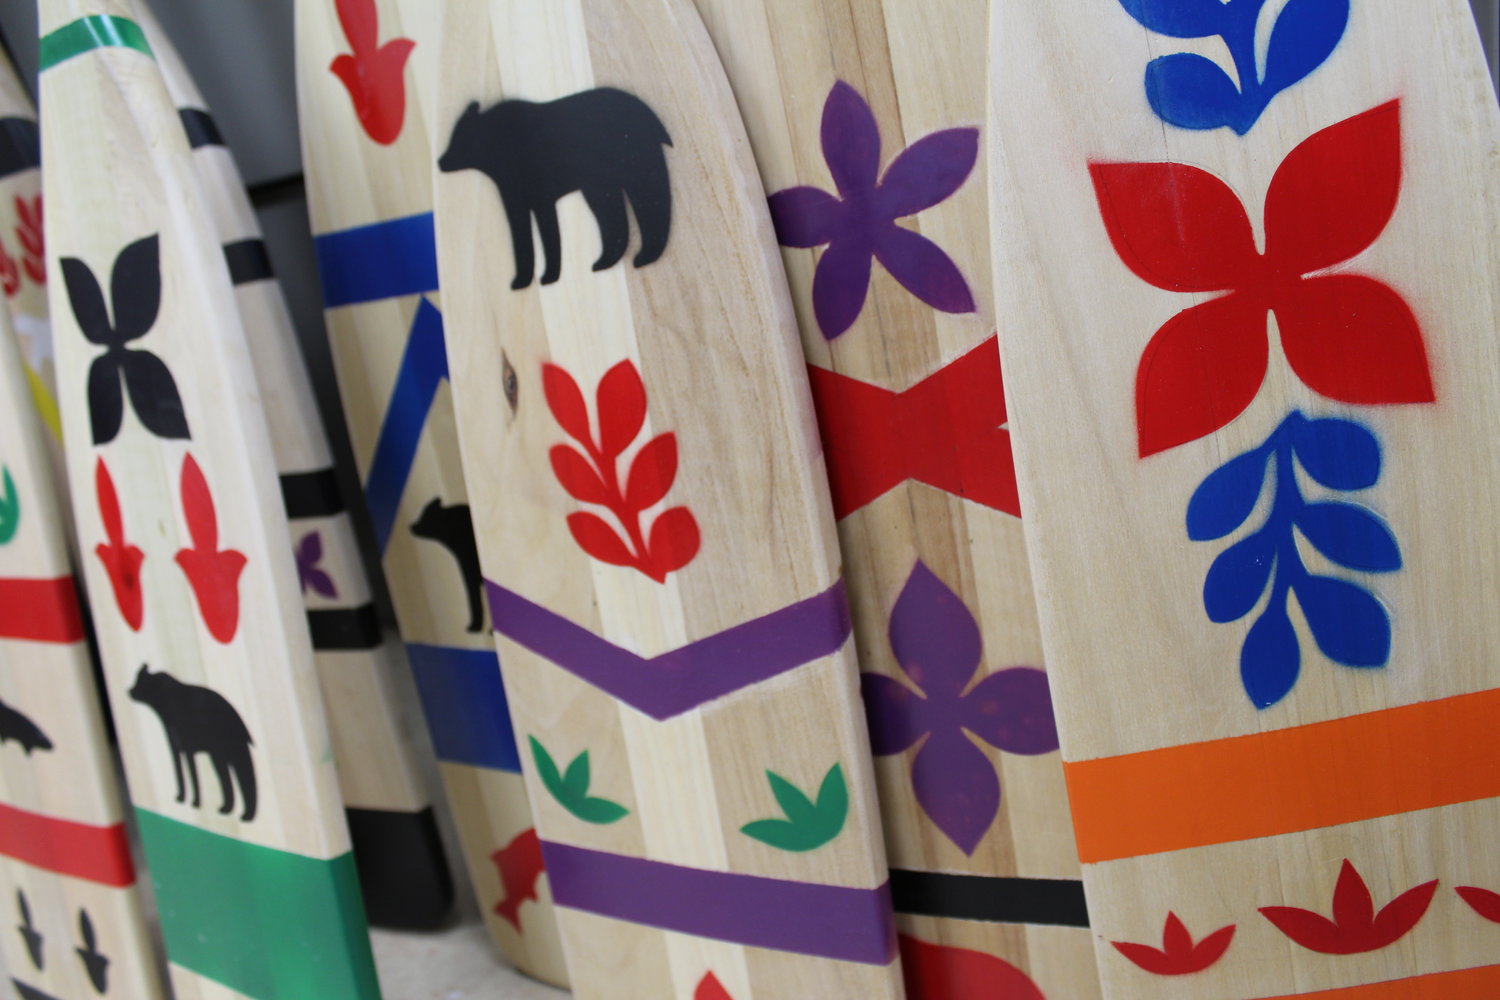 Paddles (apowai) with traditional Atikamekw patterns produced by the Tapiskwan collective 